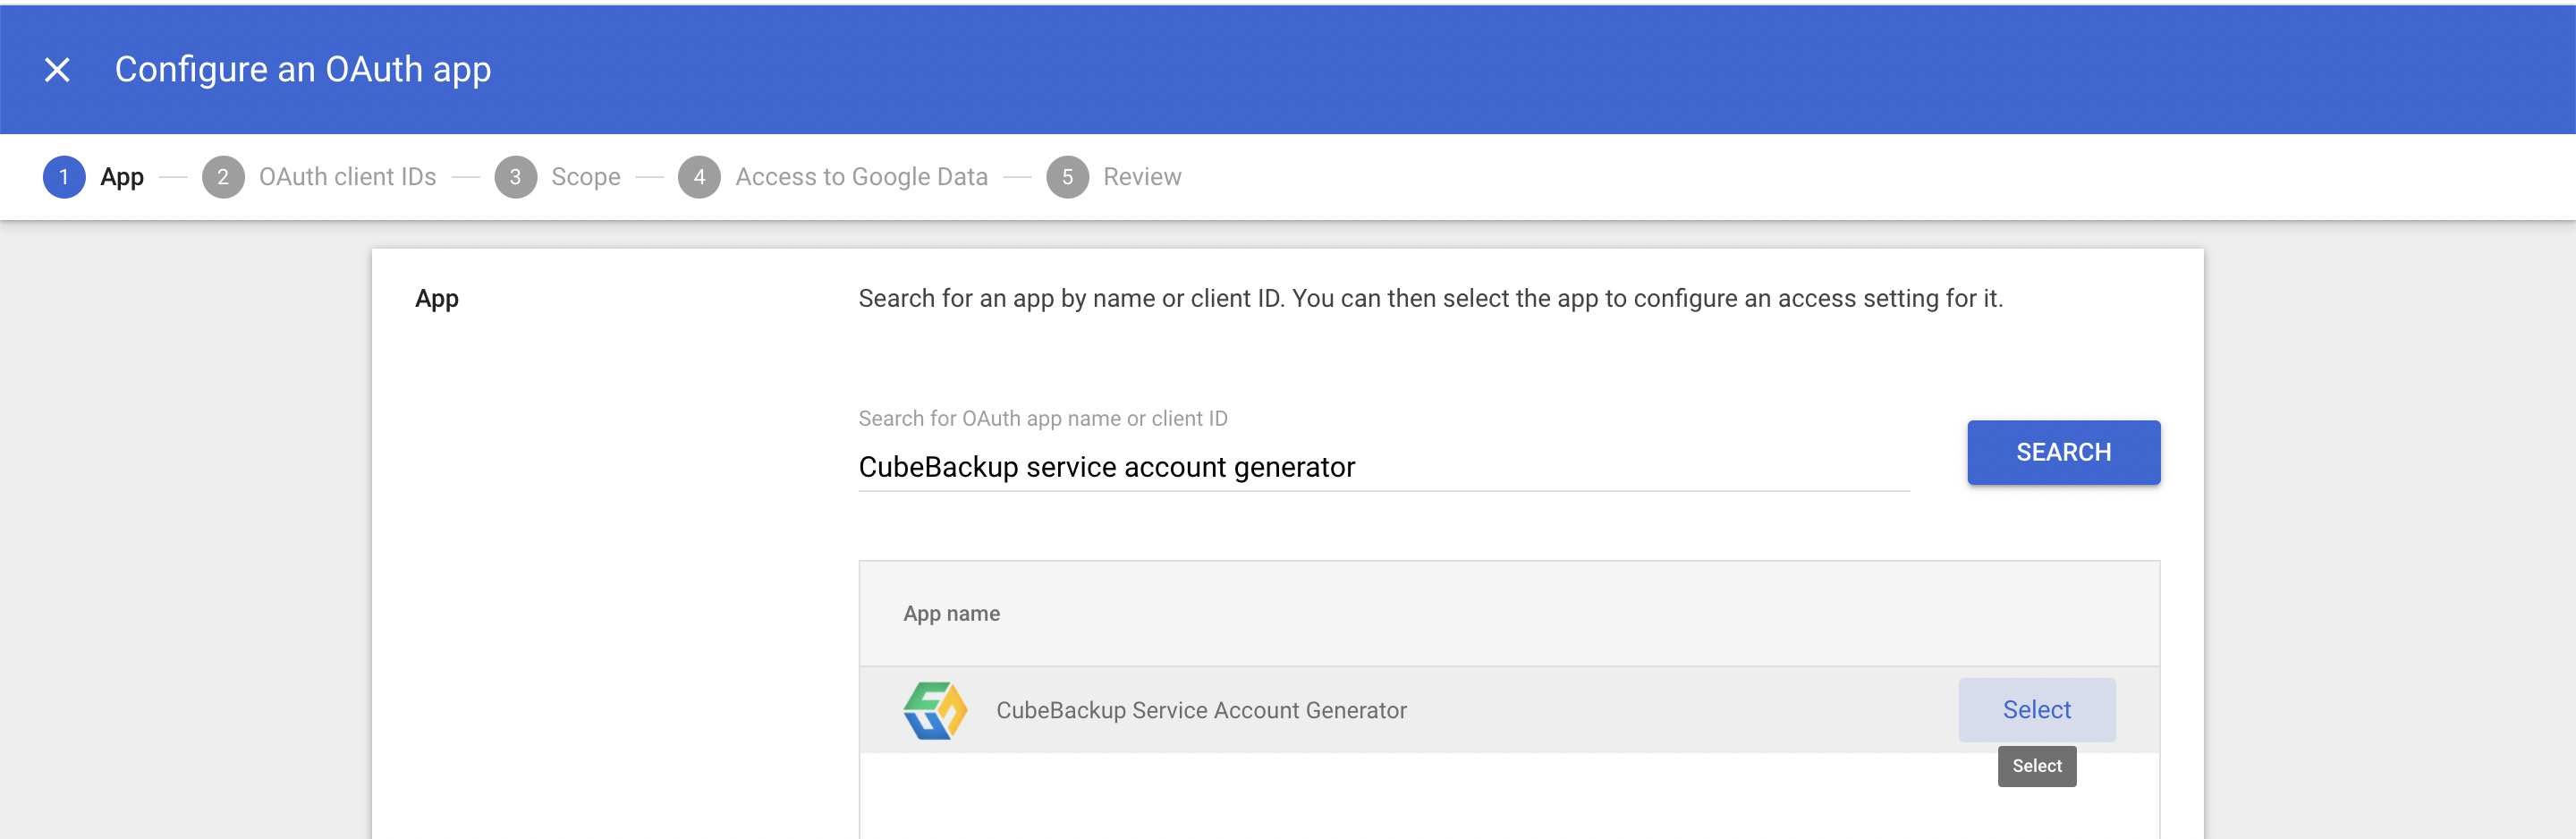 Search for CubeBackup Service Account Generator